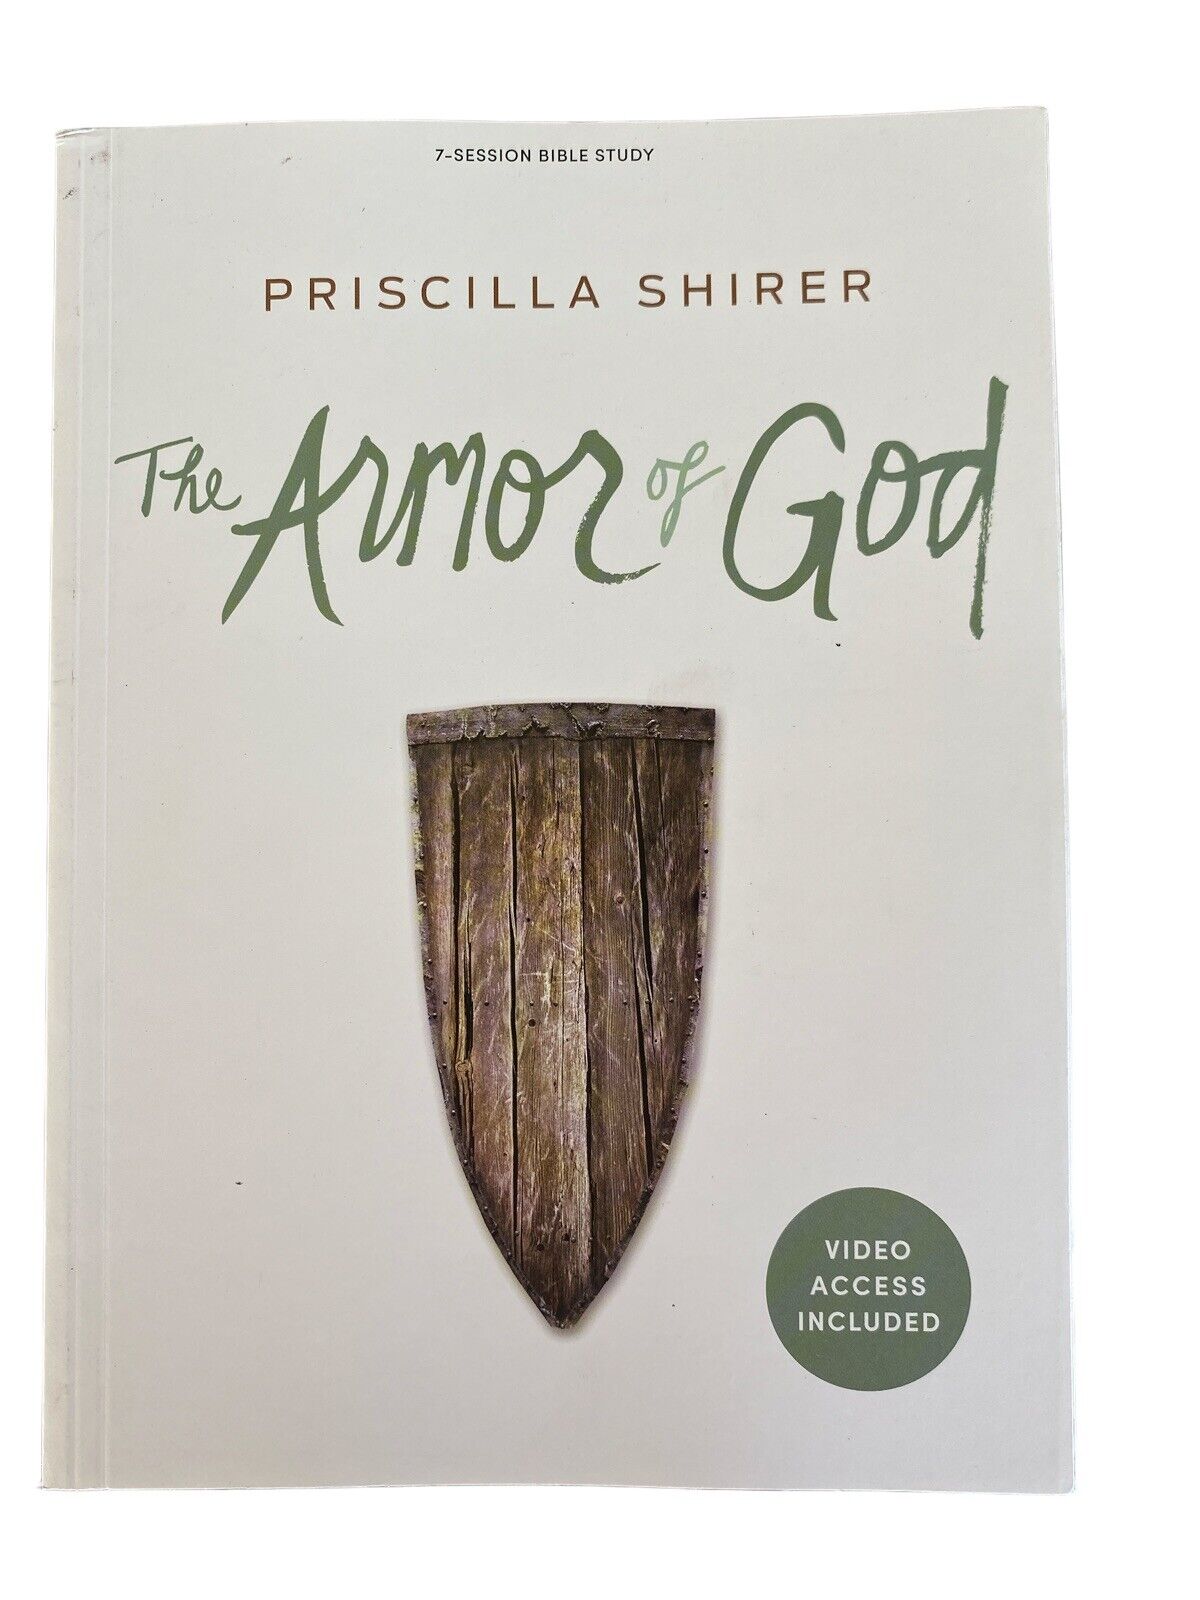 The Armor of God by Priscilla Shirer - 7-session Bible Study, paperback